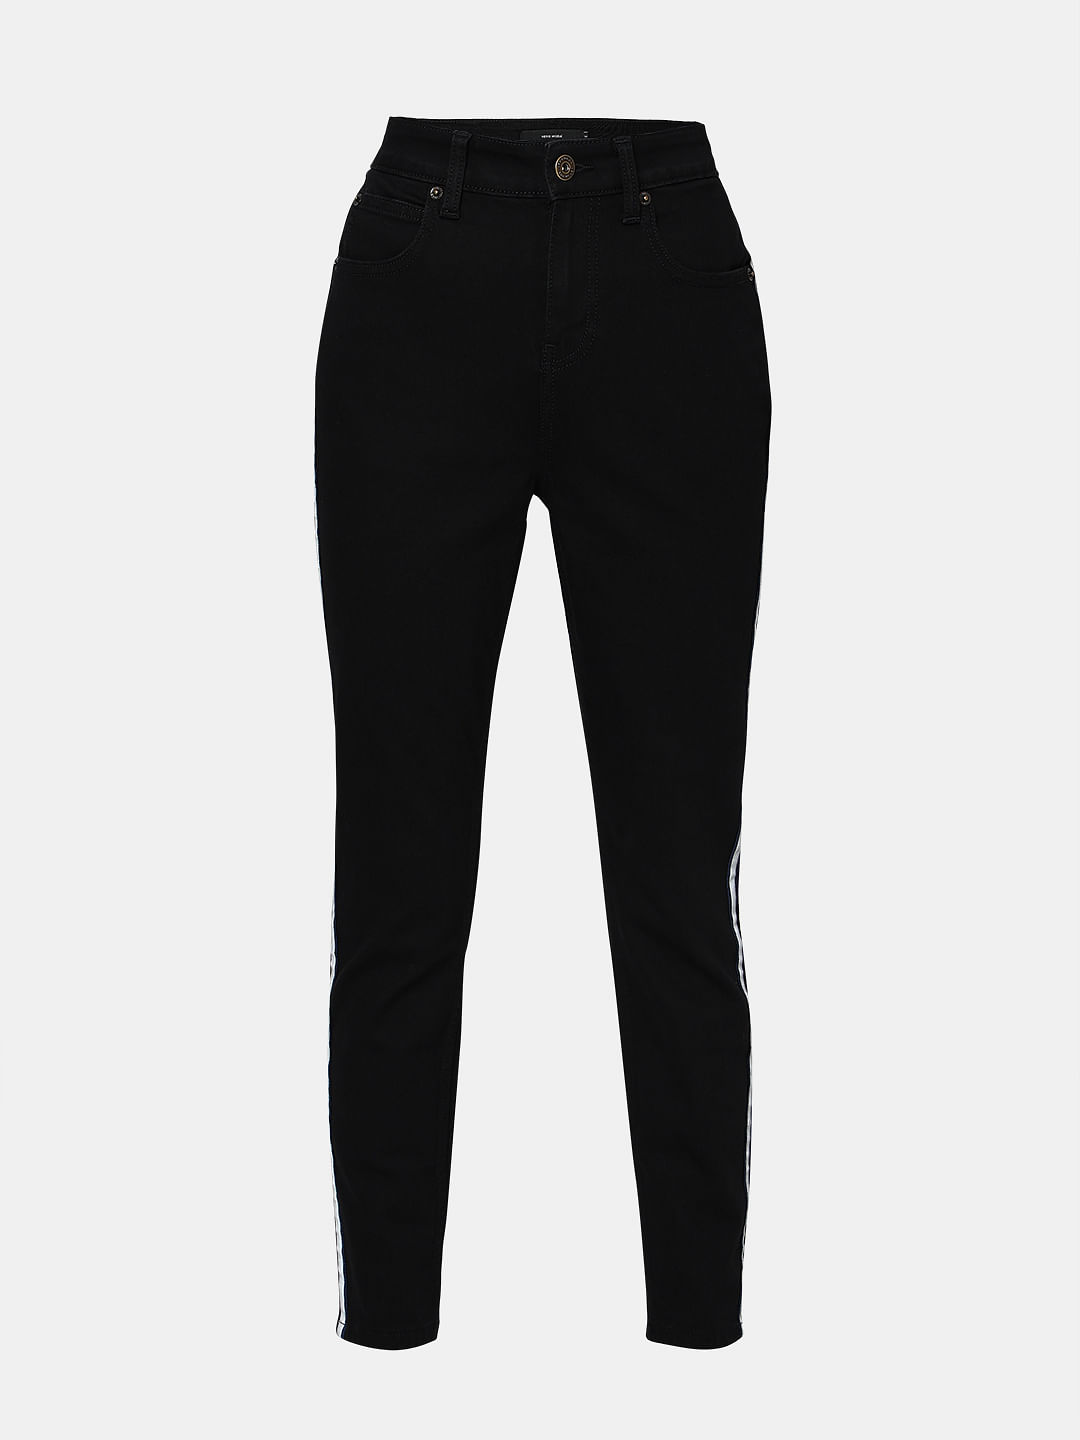 Buy Moda Rapido Women Black Skinny Fit Mid Rise Ankle Length Clean Look  Stretchable Jeans - Jeans for Women 2161993 | Myntra